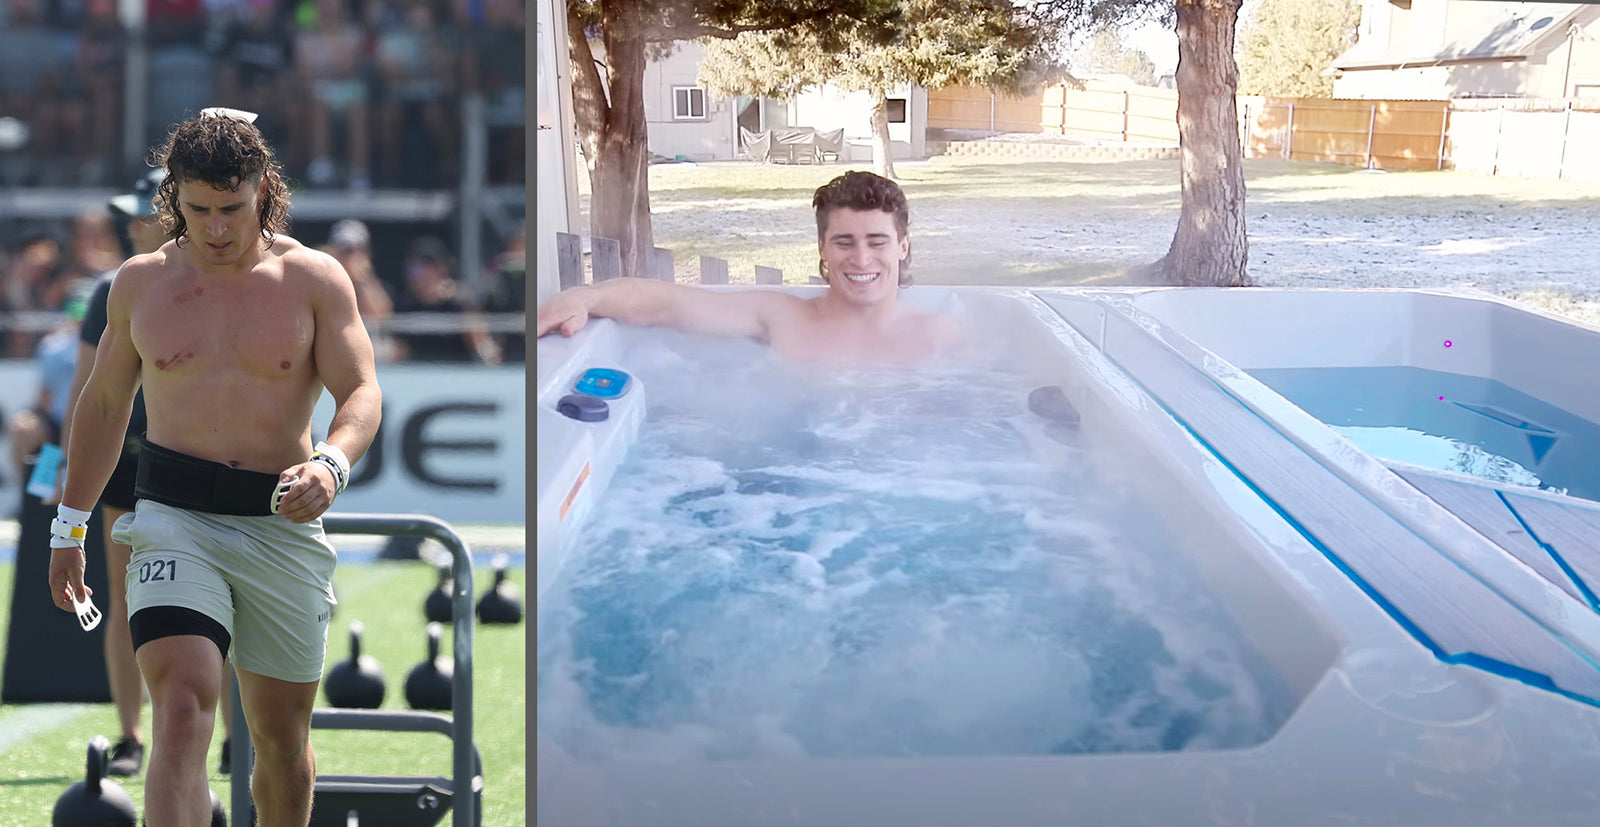 Chilly GOAT Cold Tubs and CrossFit athlete Justin Medeiros announce partnership